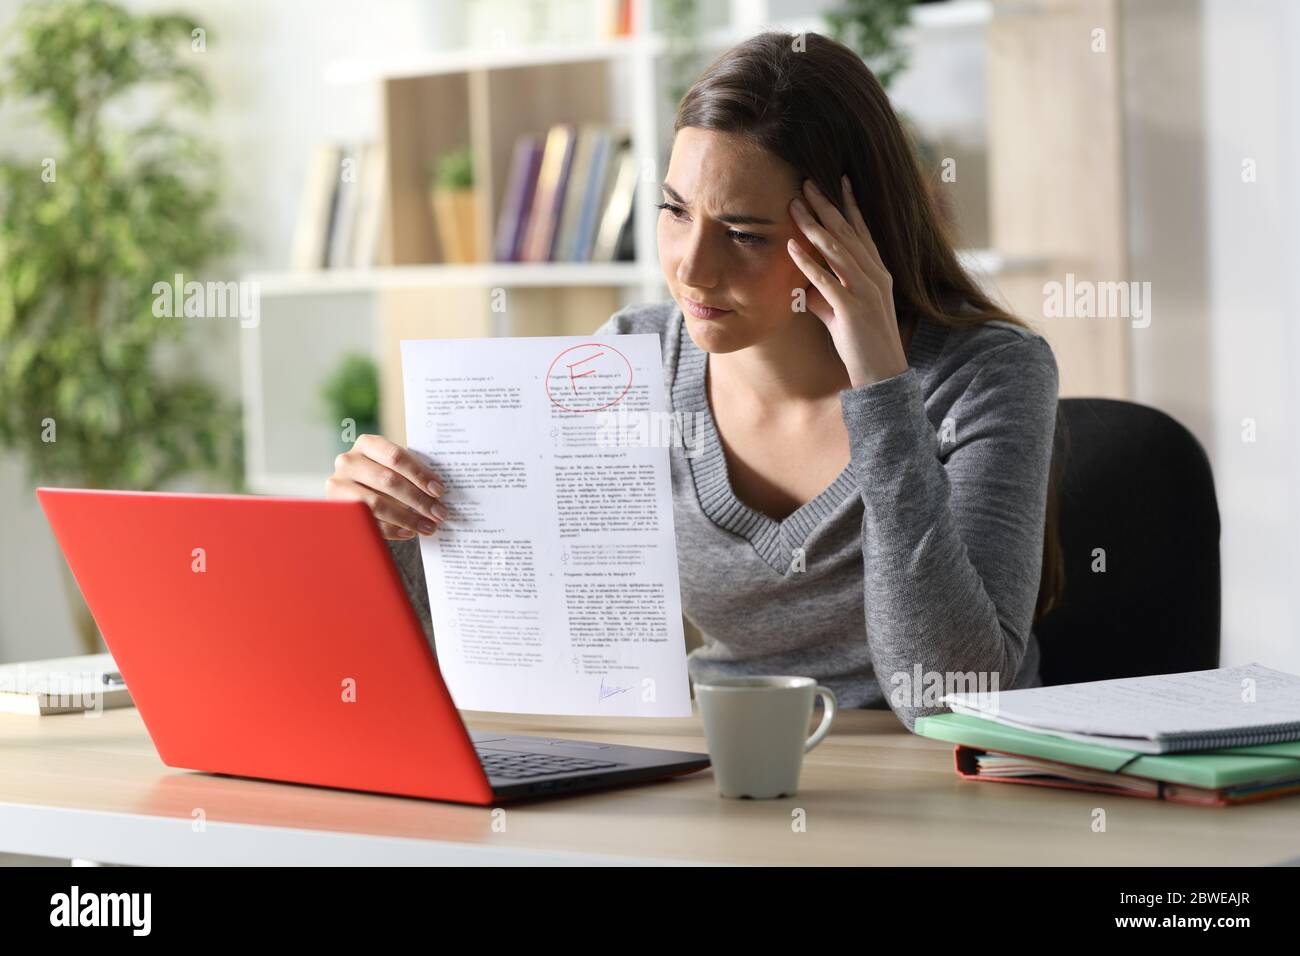 Sad student woman showing failed exam on videocall on laptop sitting on a desk at home Stock Photo